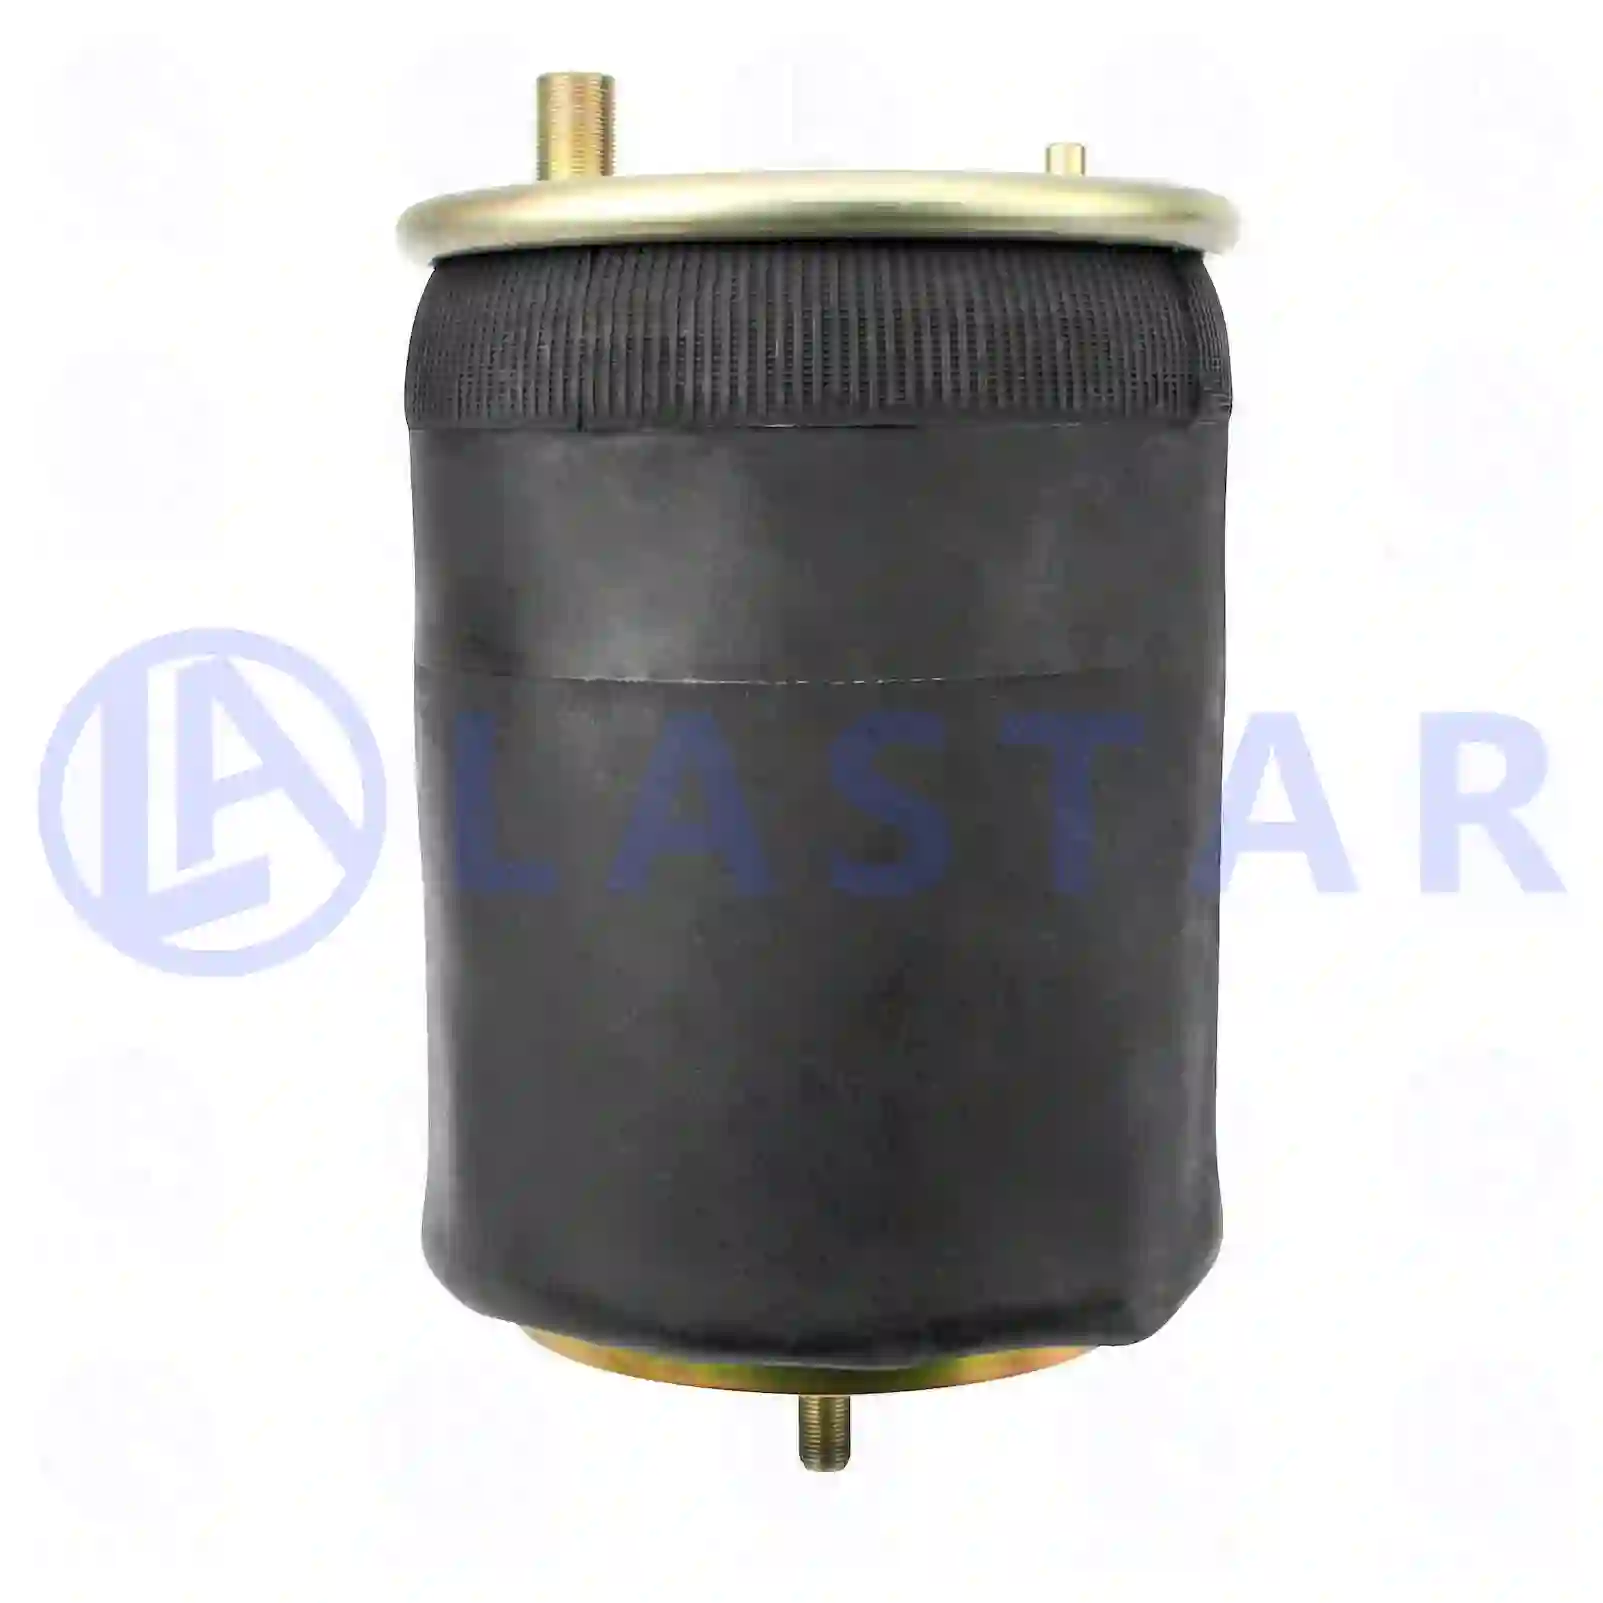 Air spring, with steel piston, 77727226, 5010294309, 5010488070, 7422190563, 20757541, 22025613, ZG40787-0008 ||  77727226 Lastar Spare Part | Truck Spare Parts, Auotomotive Spare Parts Air spring, with steel piston, 77727226, 5010294309, 5010488070, 7422190563, 20757541, 22025613, ZG40787-0008 ||  77727226 Lastar Spare Part | Truck Spare Parts, Auotomotive Spare Parts